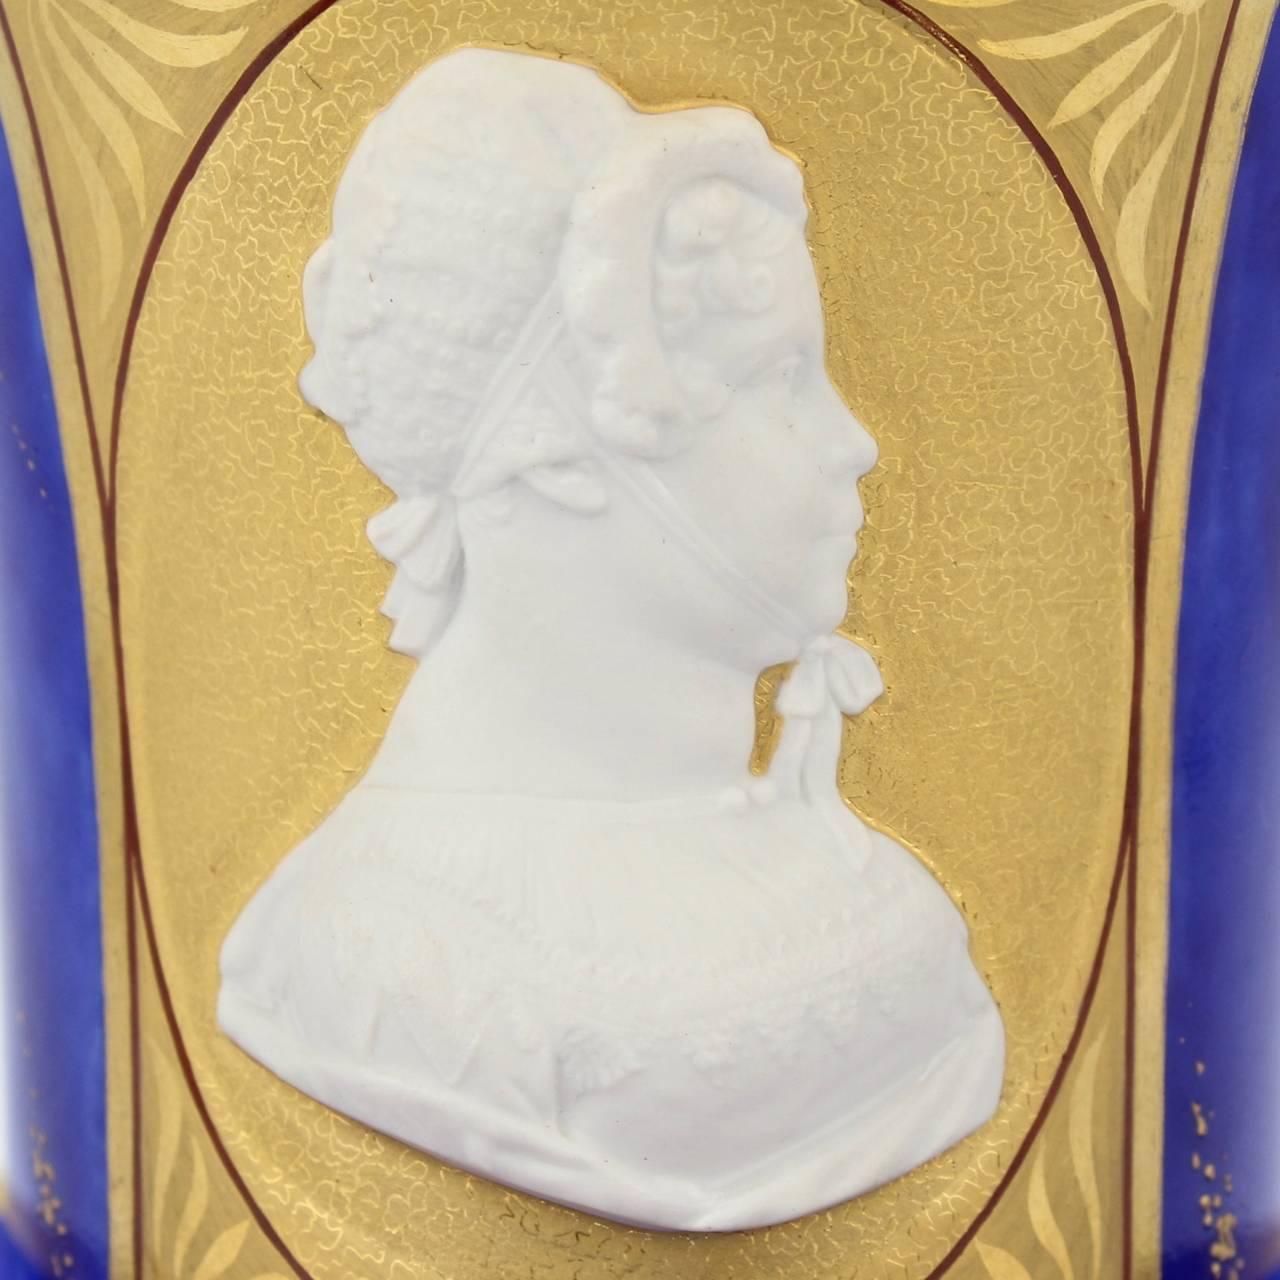 A wonderful and rare KPM Berlin cameo portrait cup and saucer.

A cameo relief bisque portrait depicting Queen Frederika Louisa is centred in a gold cartouche surrounded by a mottled lapis blue ground with gilt highlights.

The cup's foot and